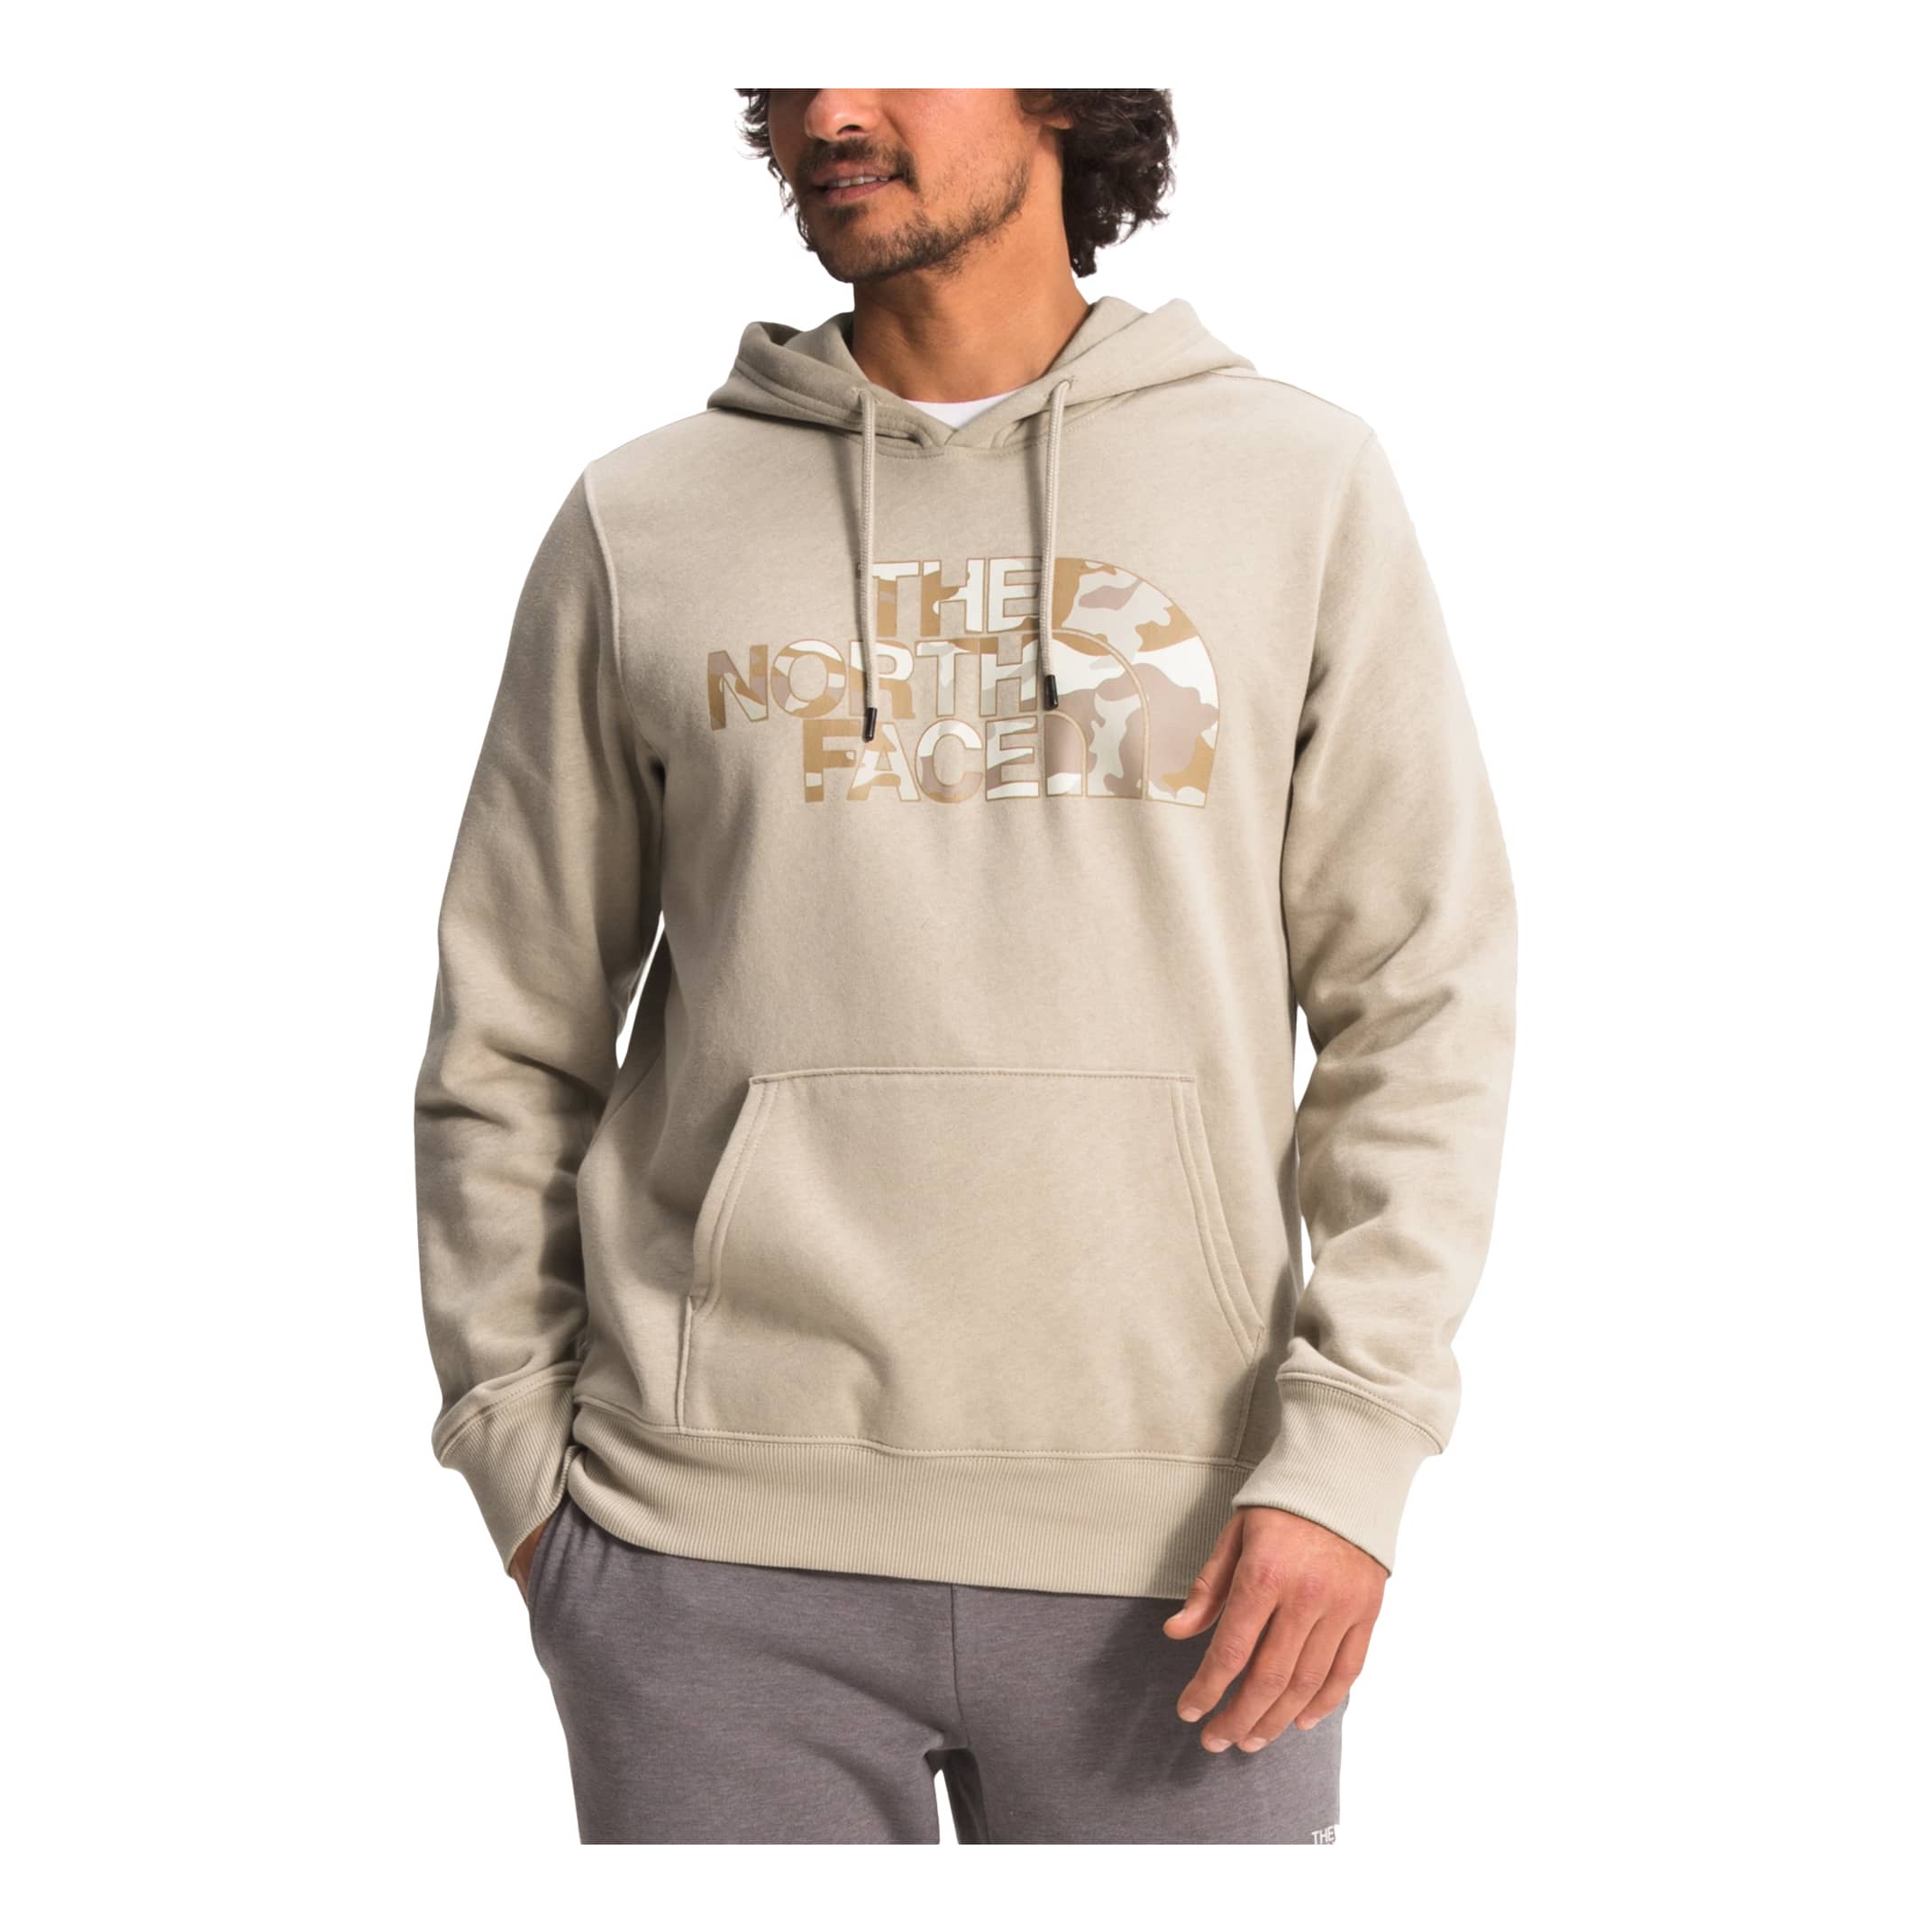 The North Face® Half Dome Pullover Hoodie - Flax/Kelp Tan